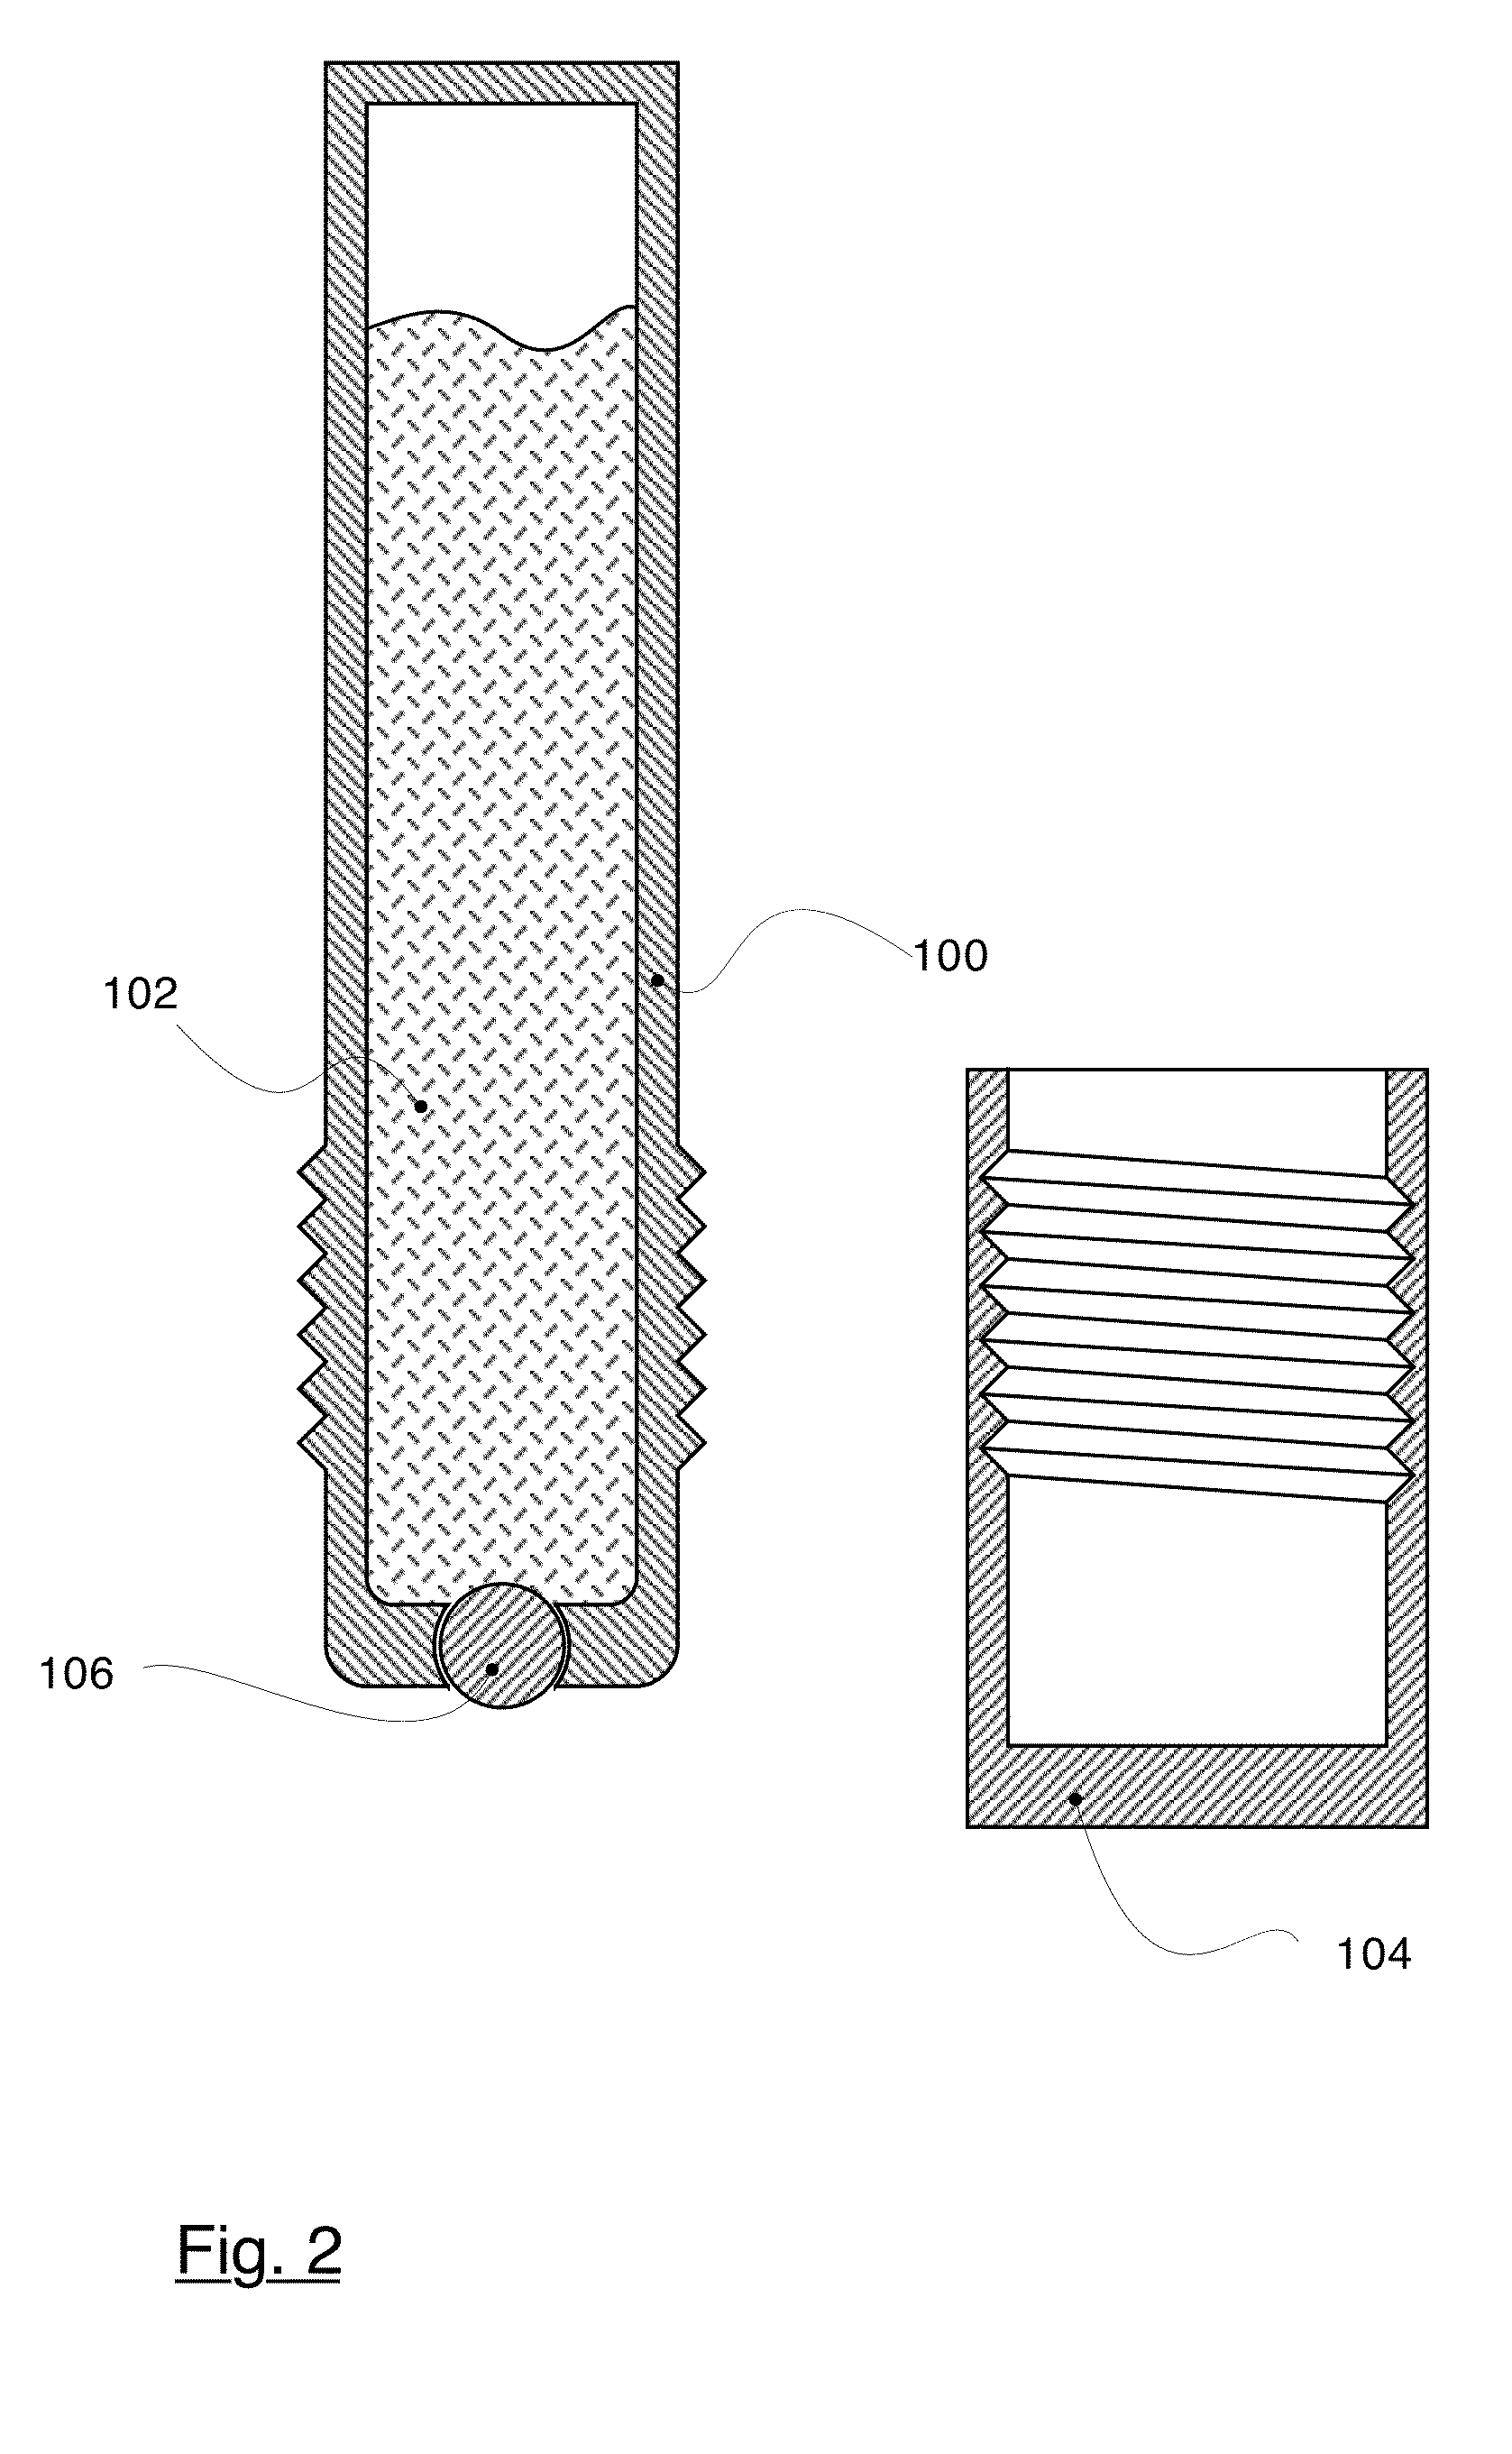 Method for the treatment and/or prevention of oral allergic symptions of the lips due to oral contact with a food allergen